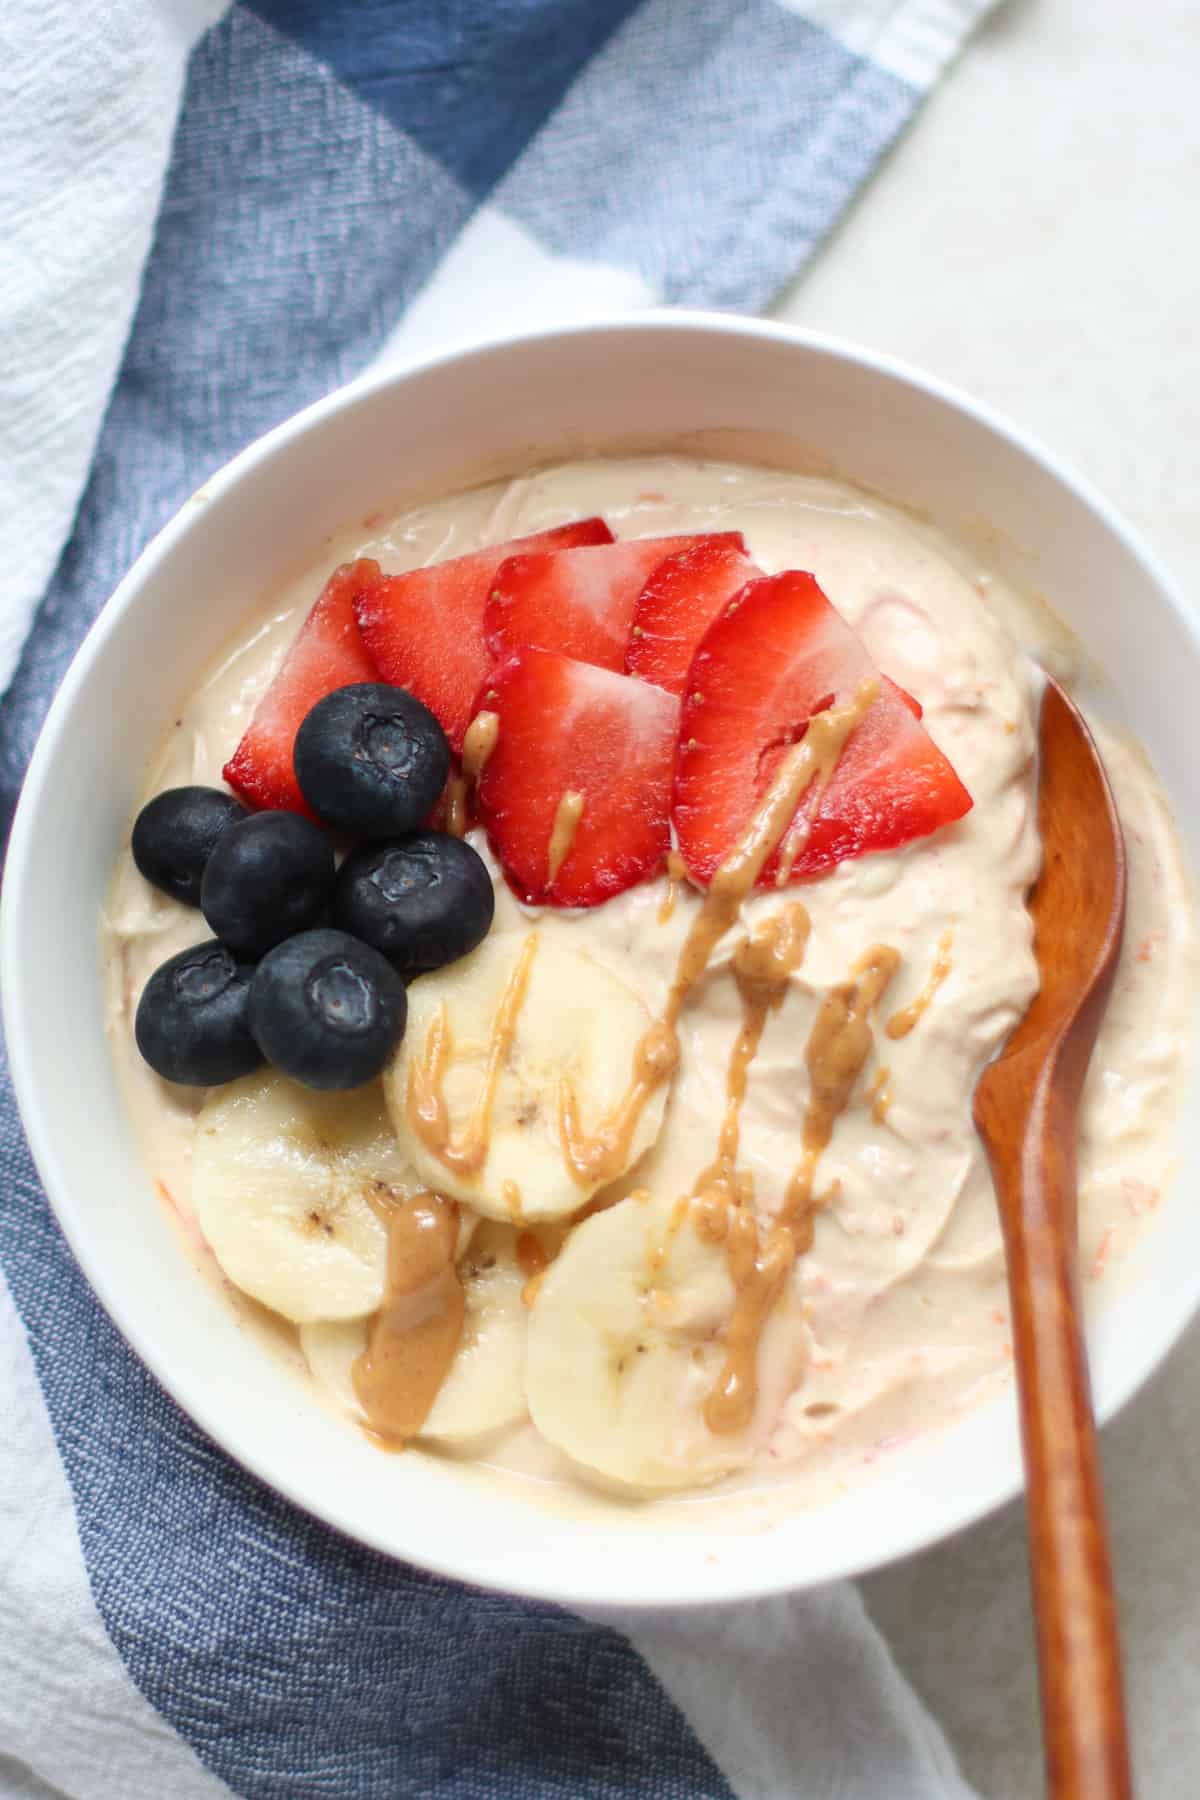 peanut butter yogurt with banana, blueberries, strawberries, and a drizzle of peanut butter.